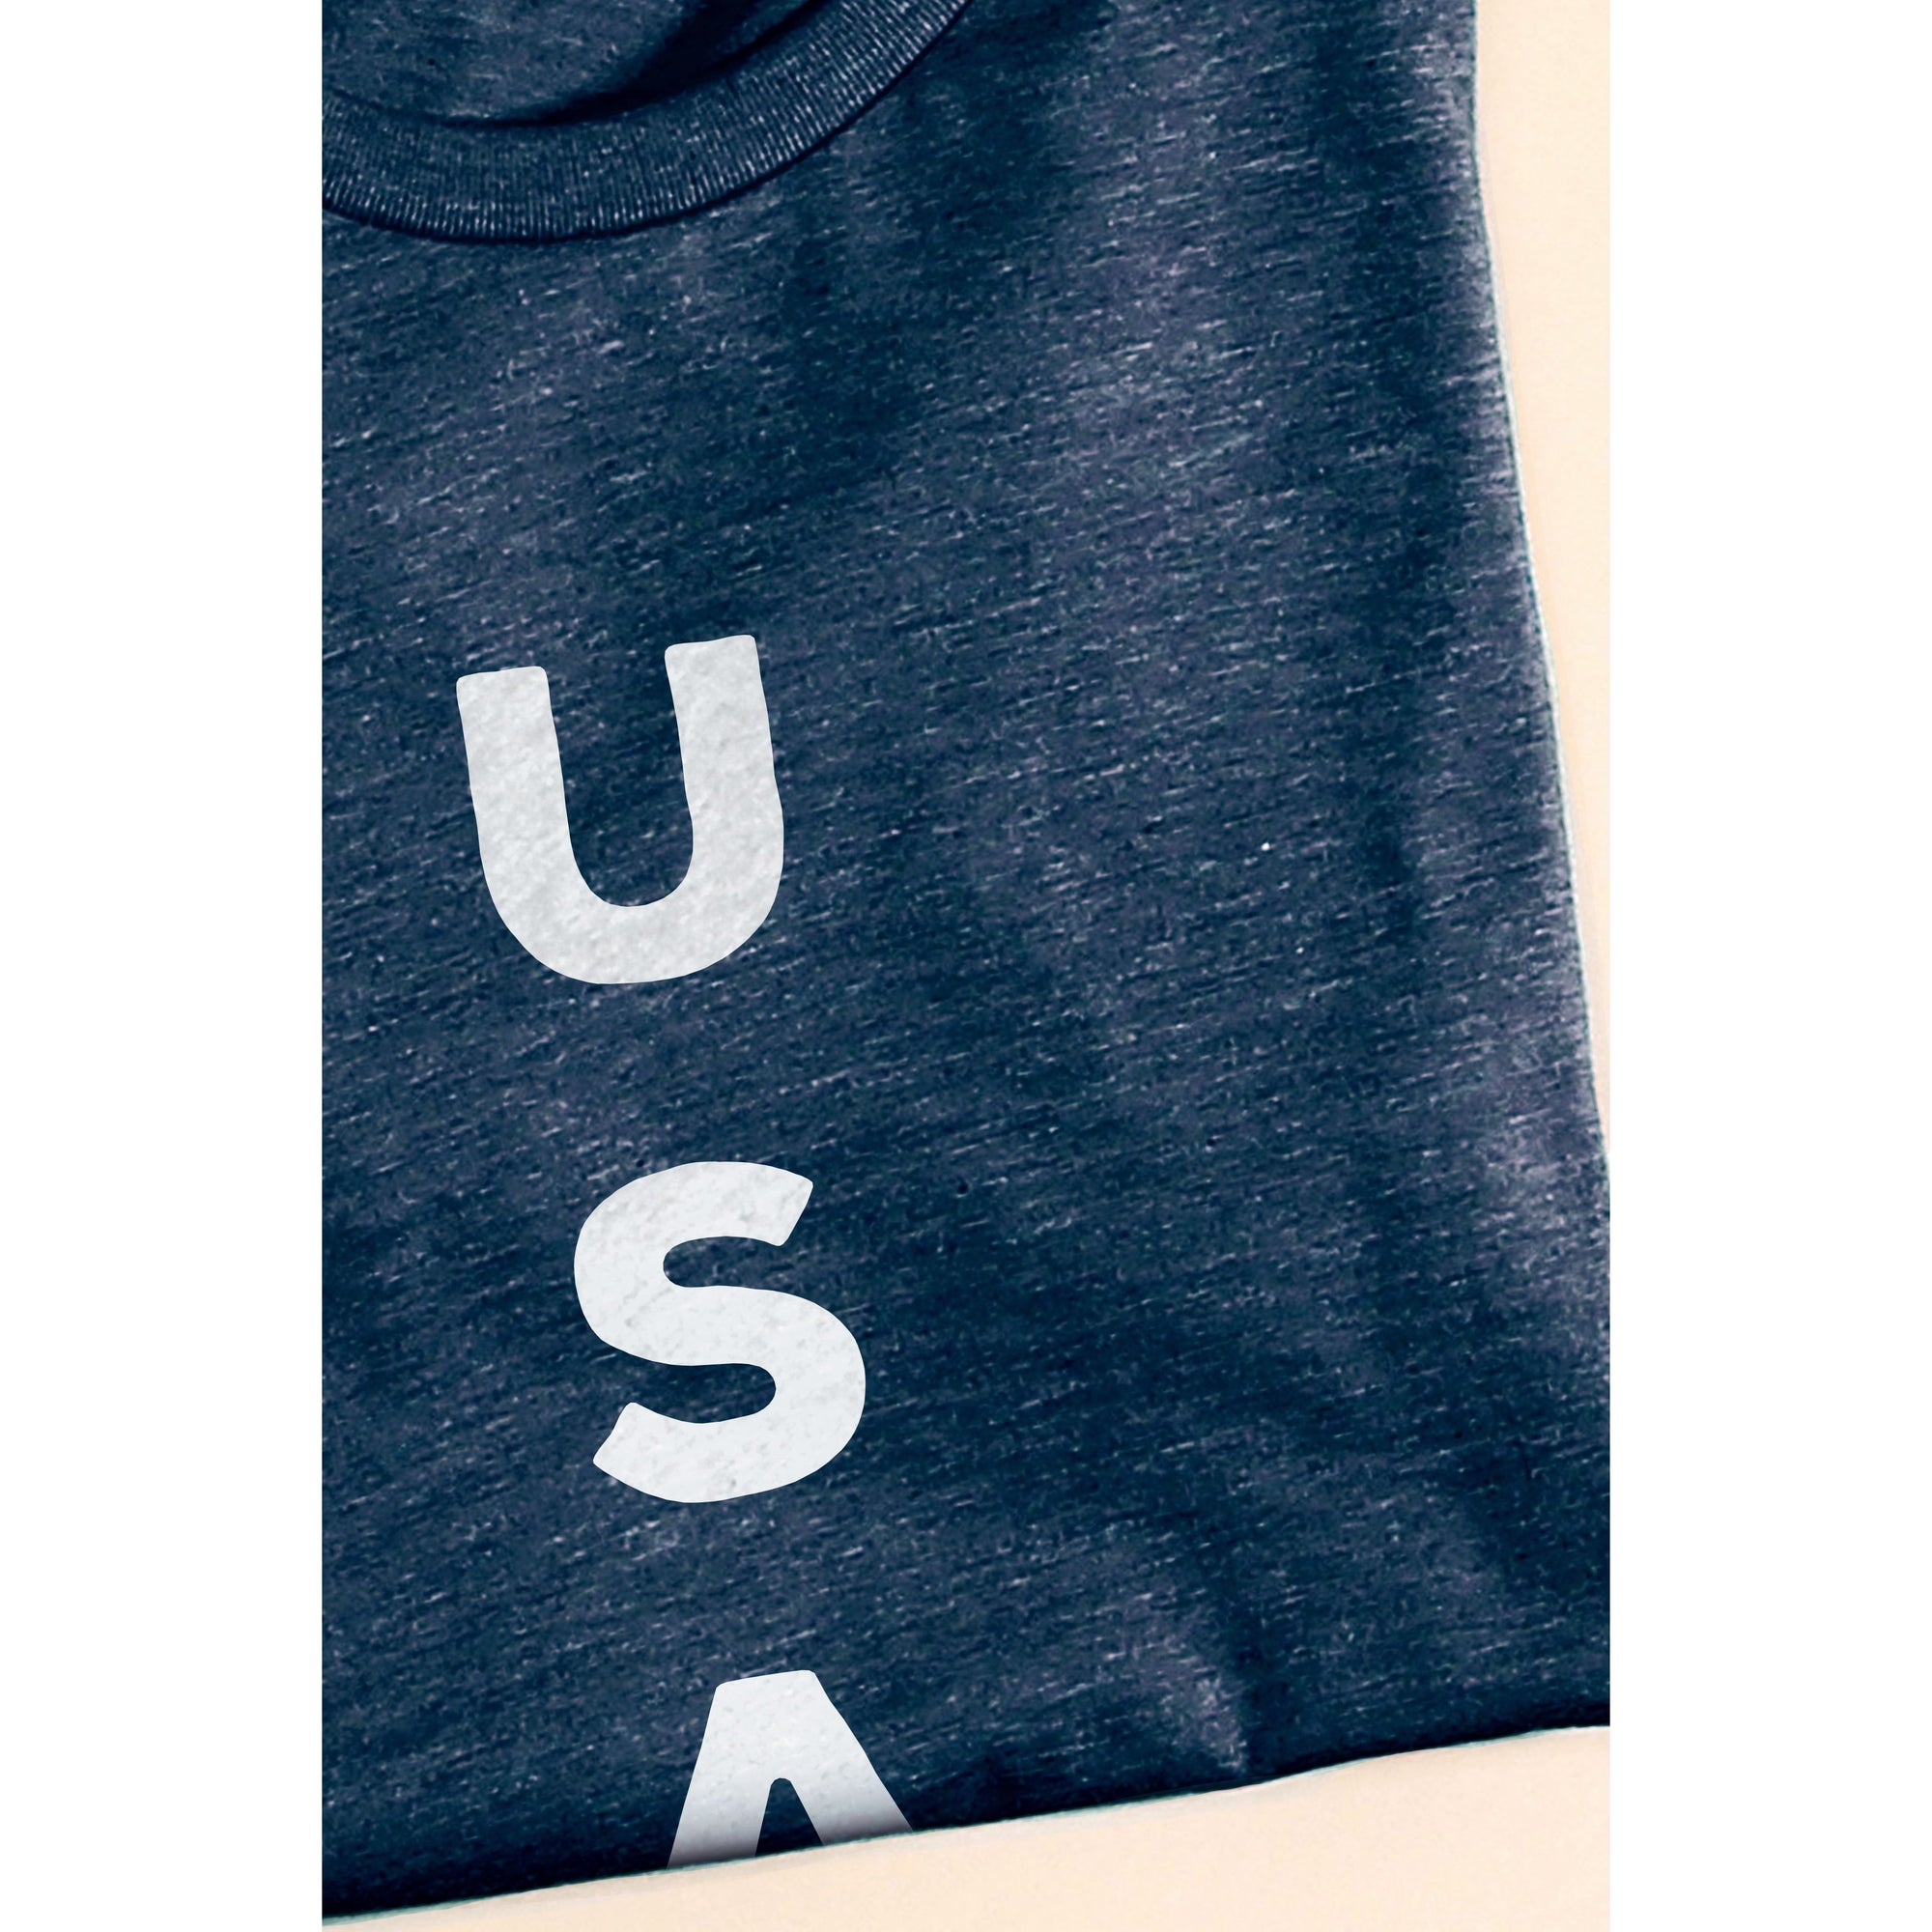 United States of America USA - thread tank | Stories you can wear.